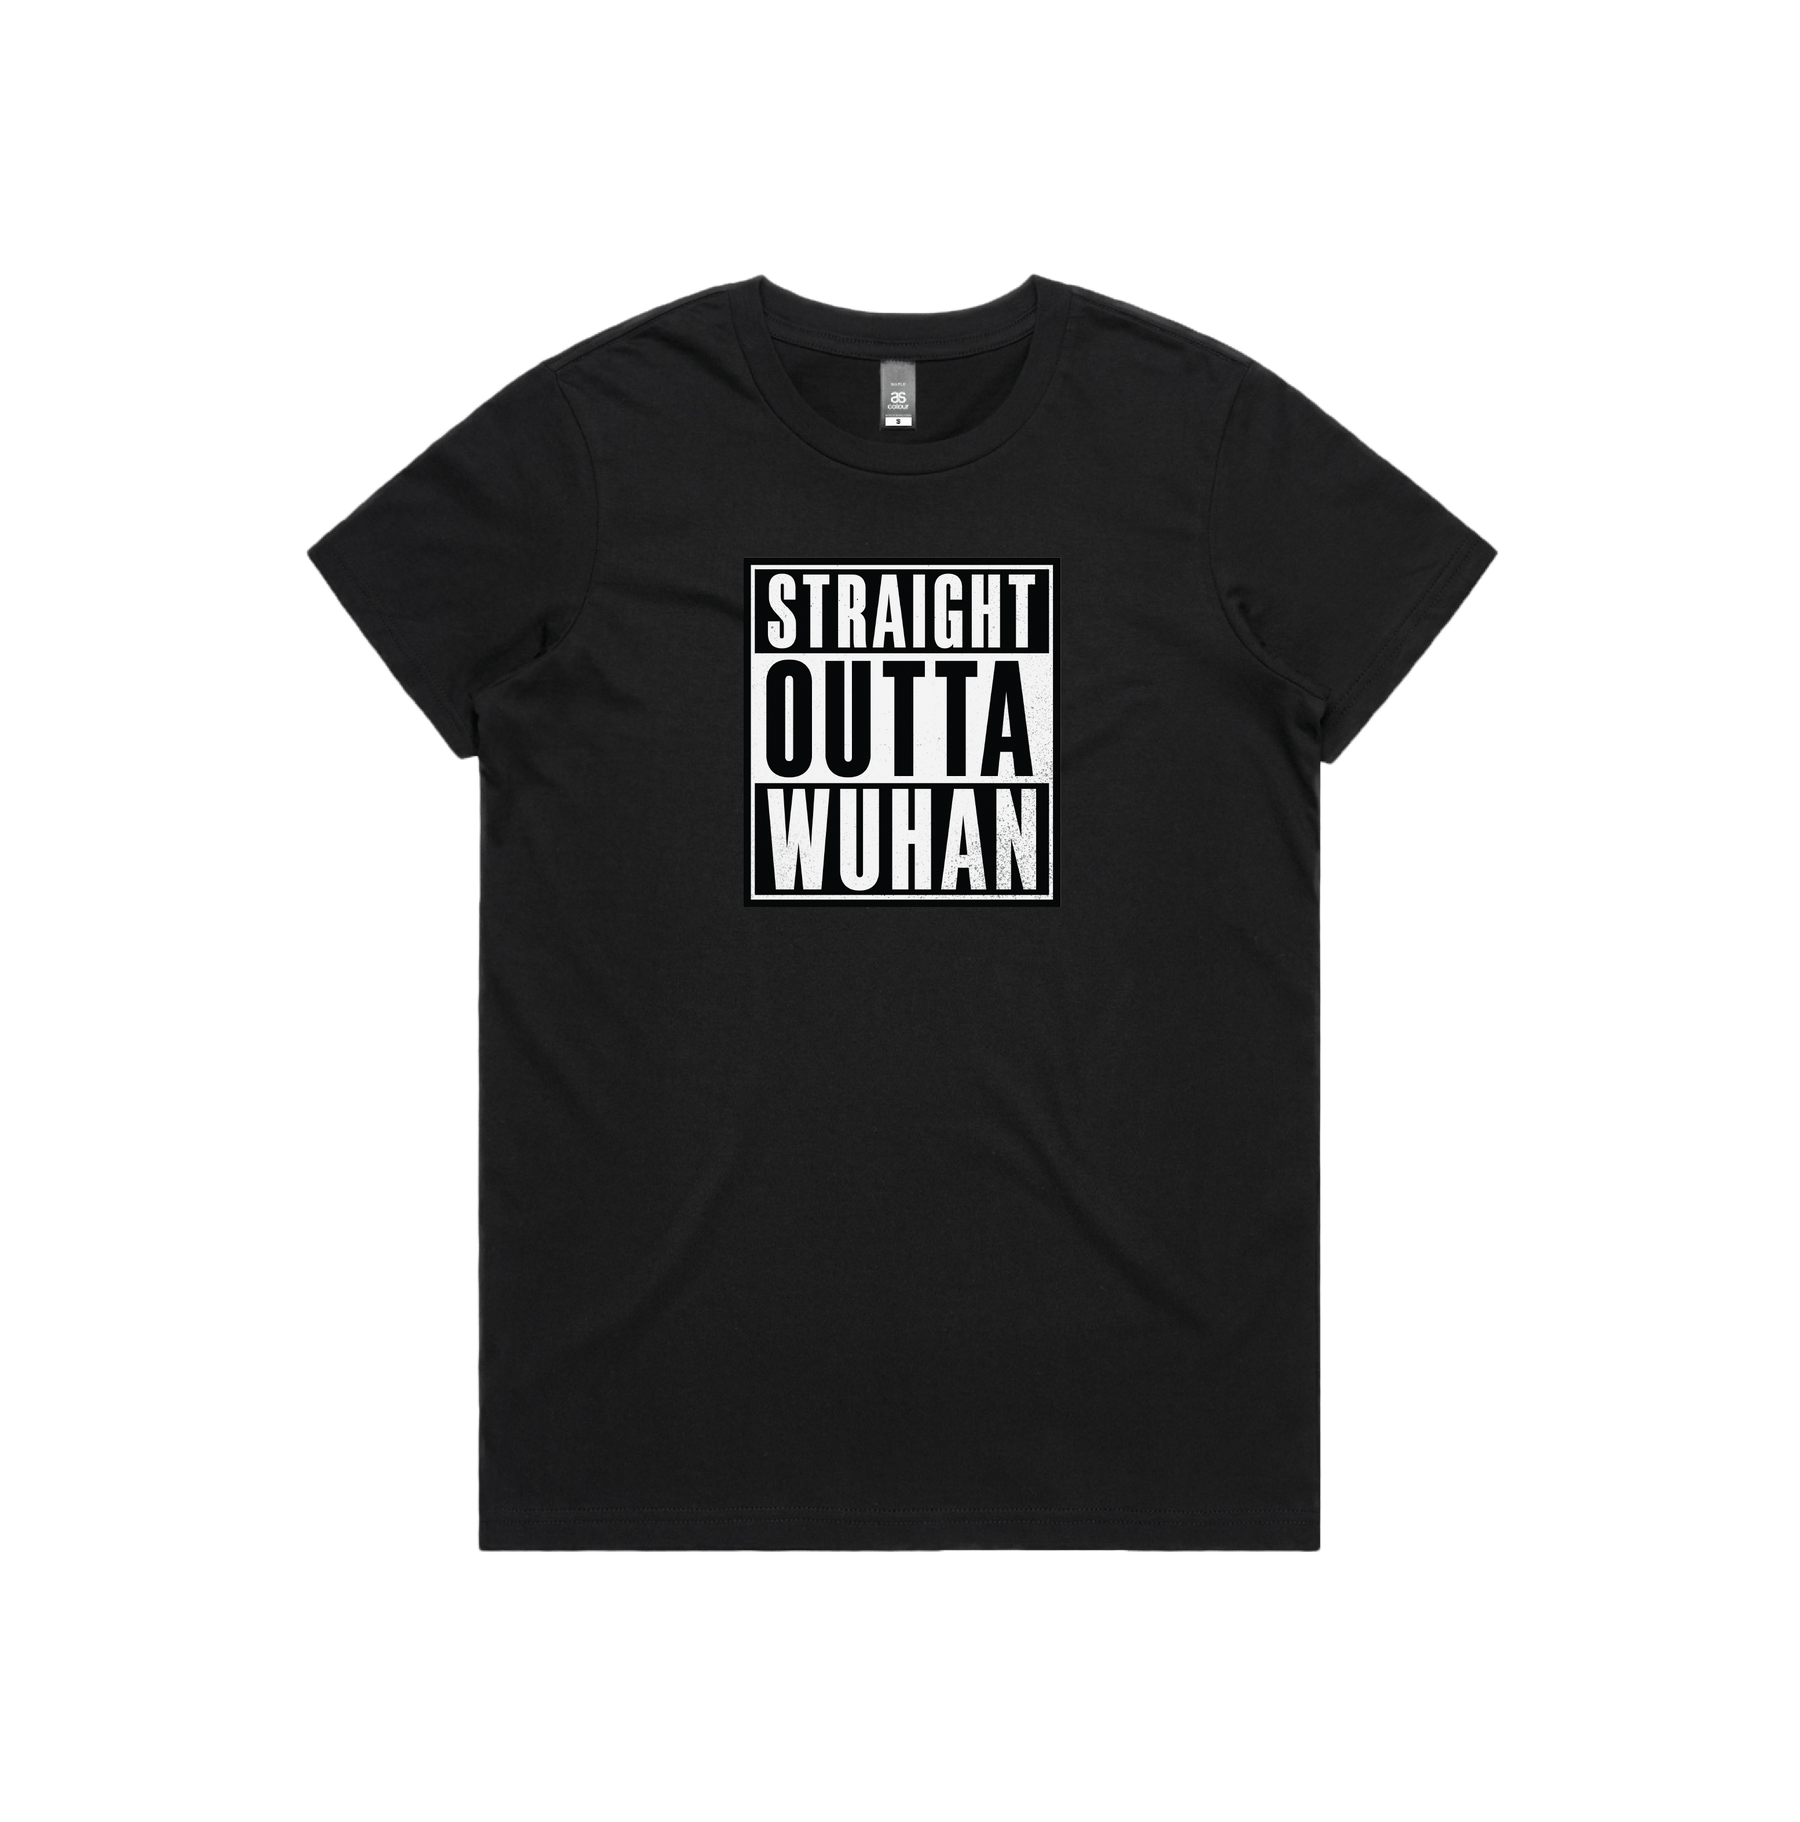 XS / Black / Large Front Design Straight Outta Wuhan ✊🏾 - Women's T Shirt